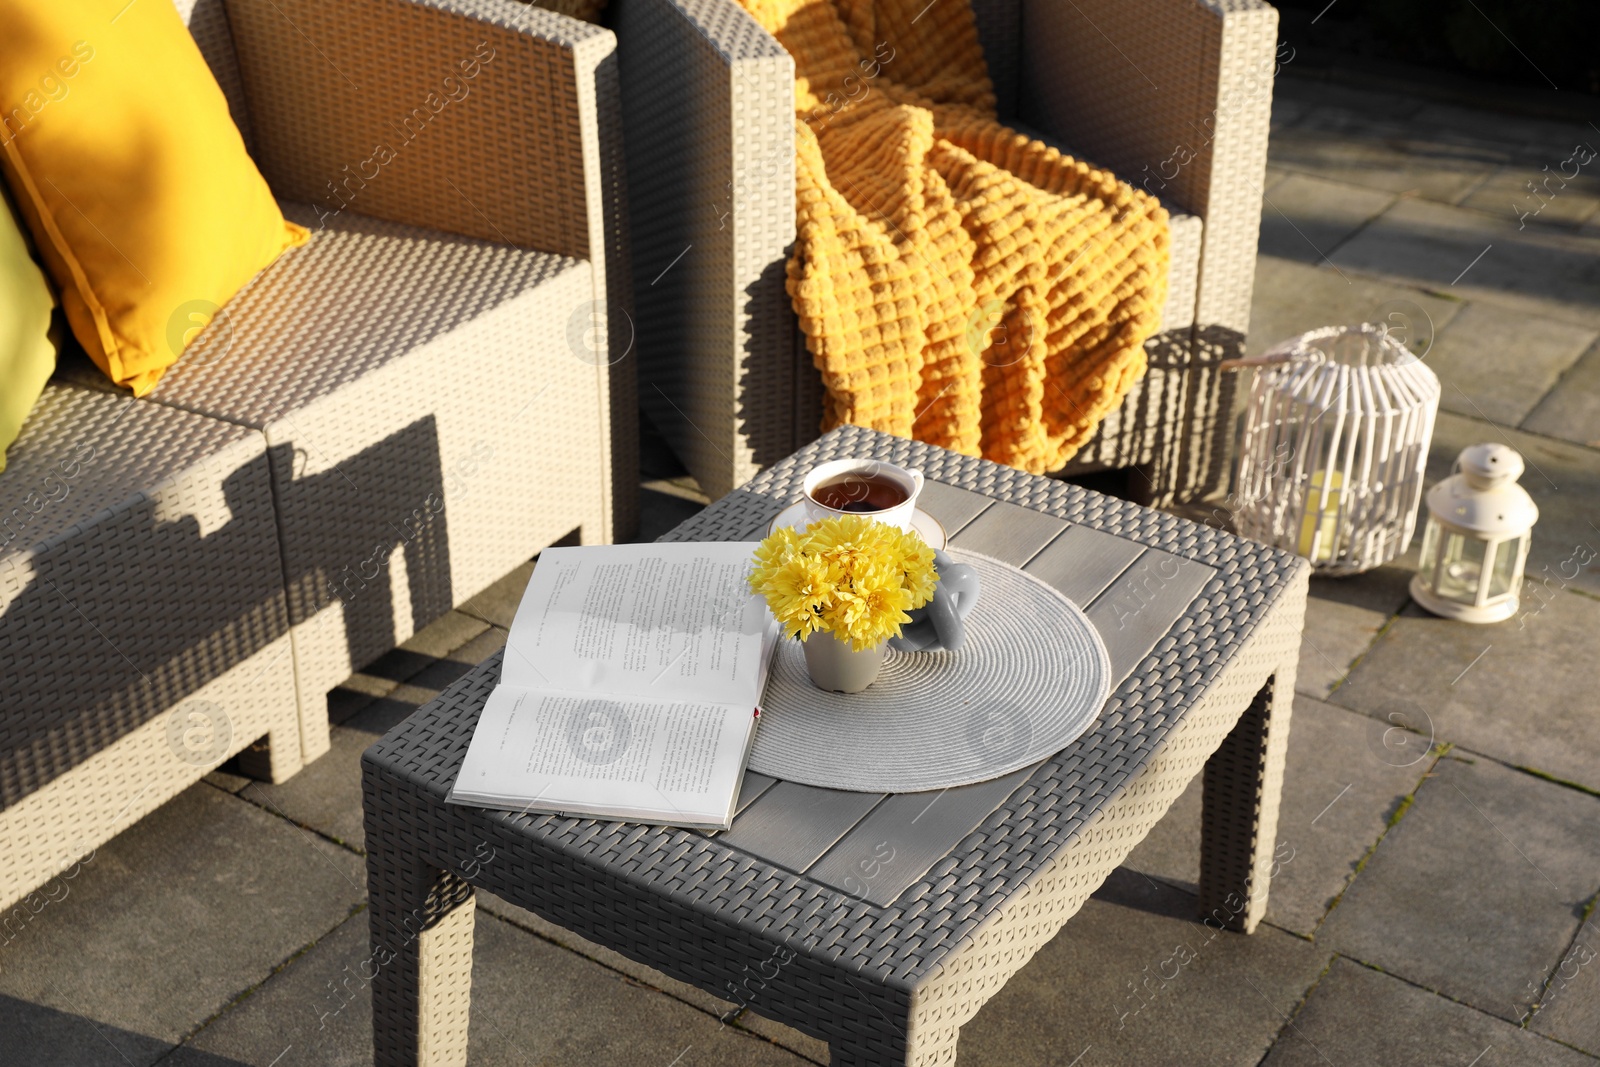 Photo of Beautiful rattan garden furniture, cup of tea and different decor elements outdoors